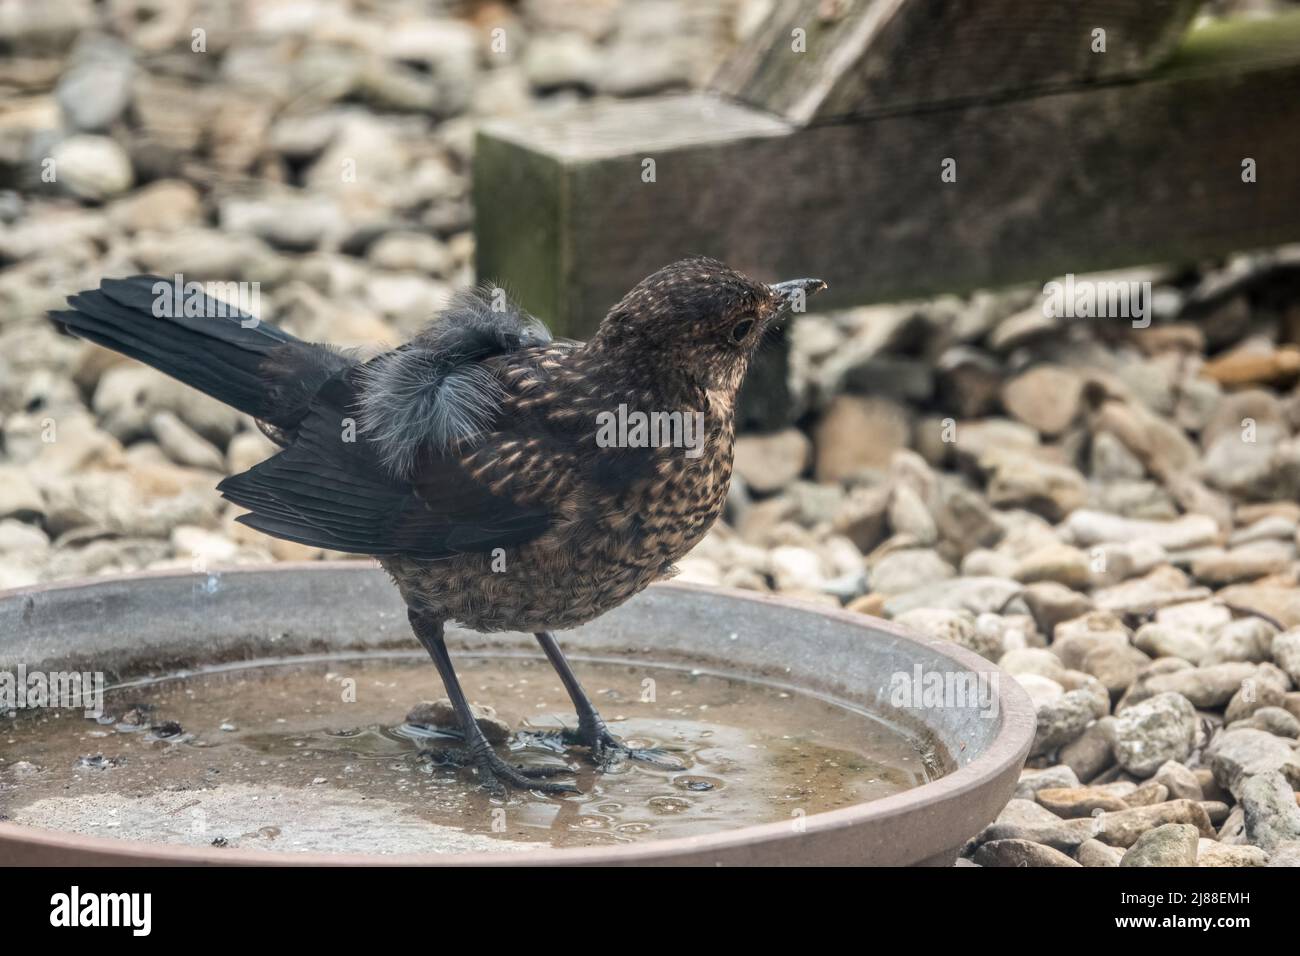 close up of a juvenile blackbird (turdus merula) stood drinking in a water bowl Stock Photo